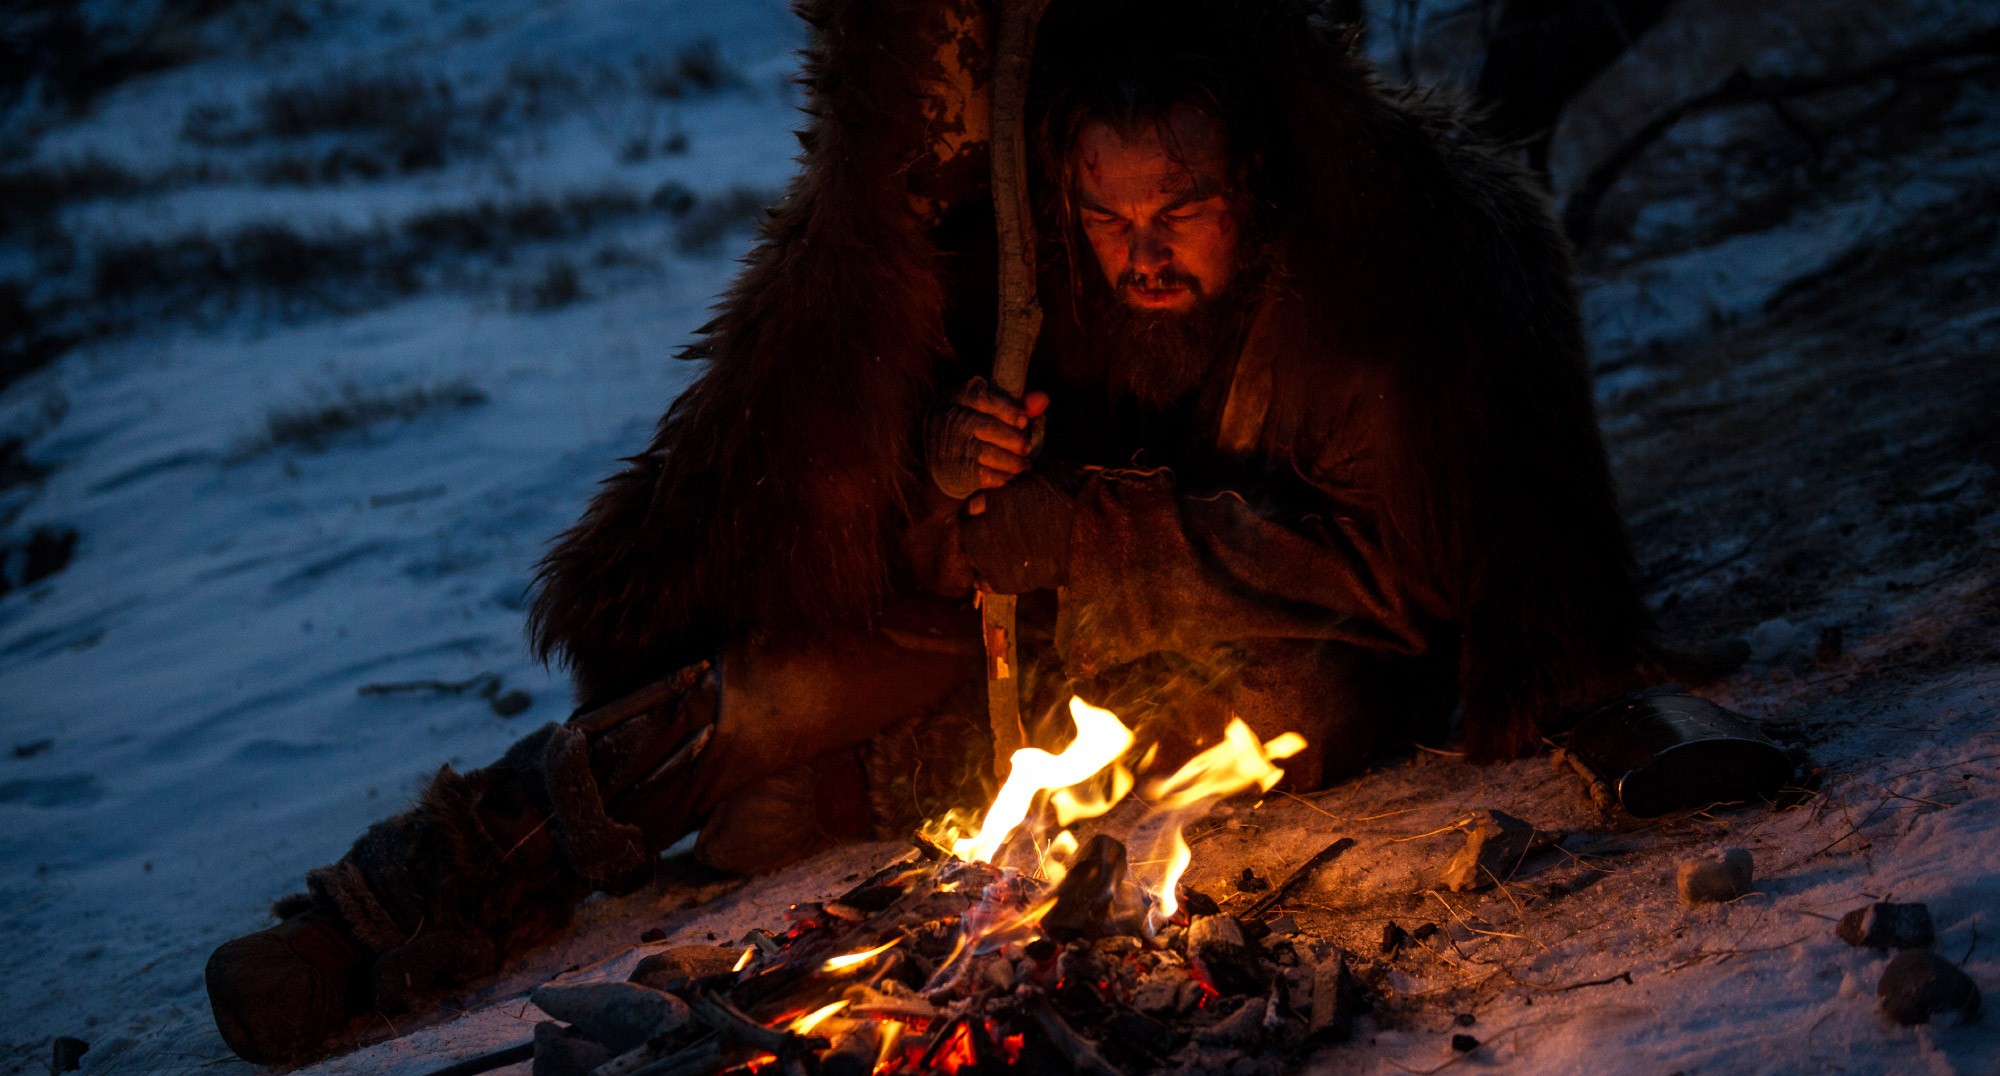 Videophiled: ‘The Revenant’ – Out of the past and back from the dead